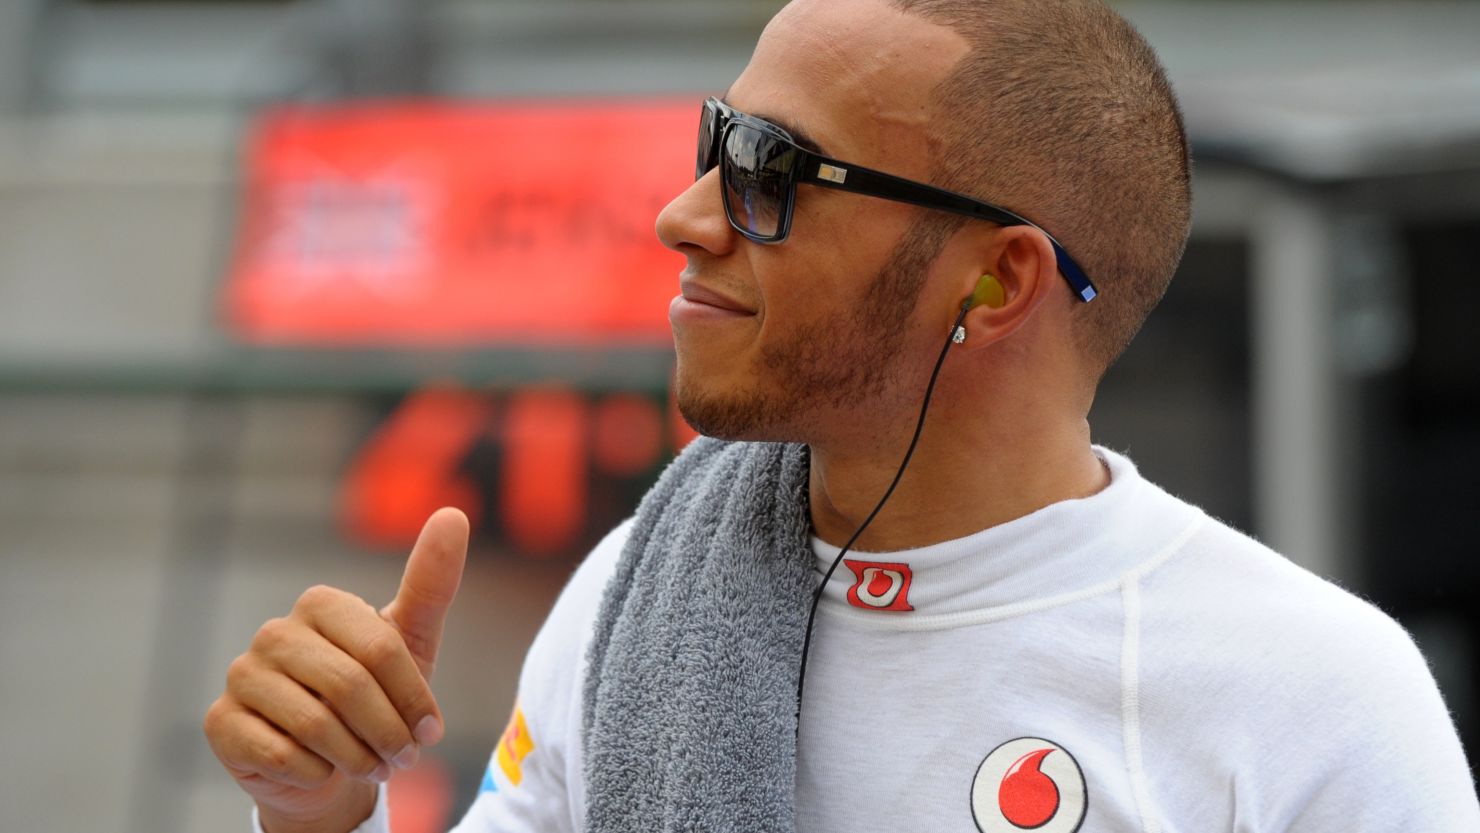 Lewis Hamilton gives the thumbs up after setting the fastest time in second practice in Hungary.